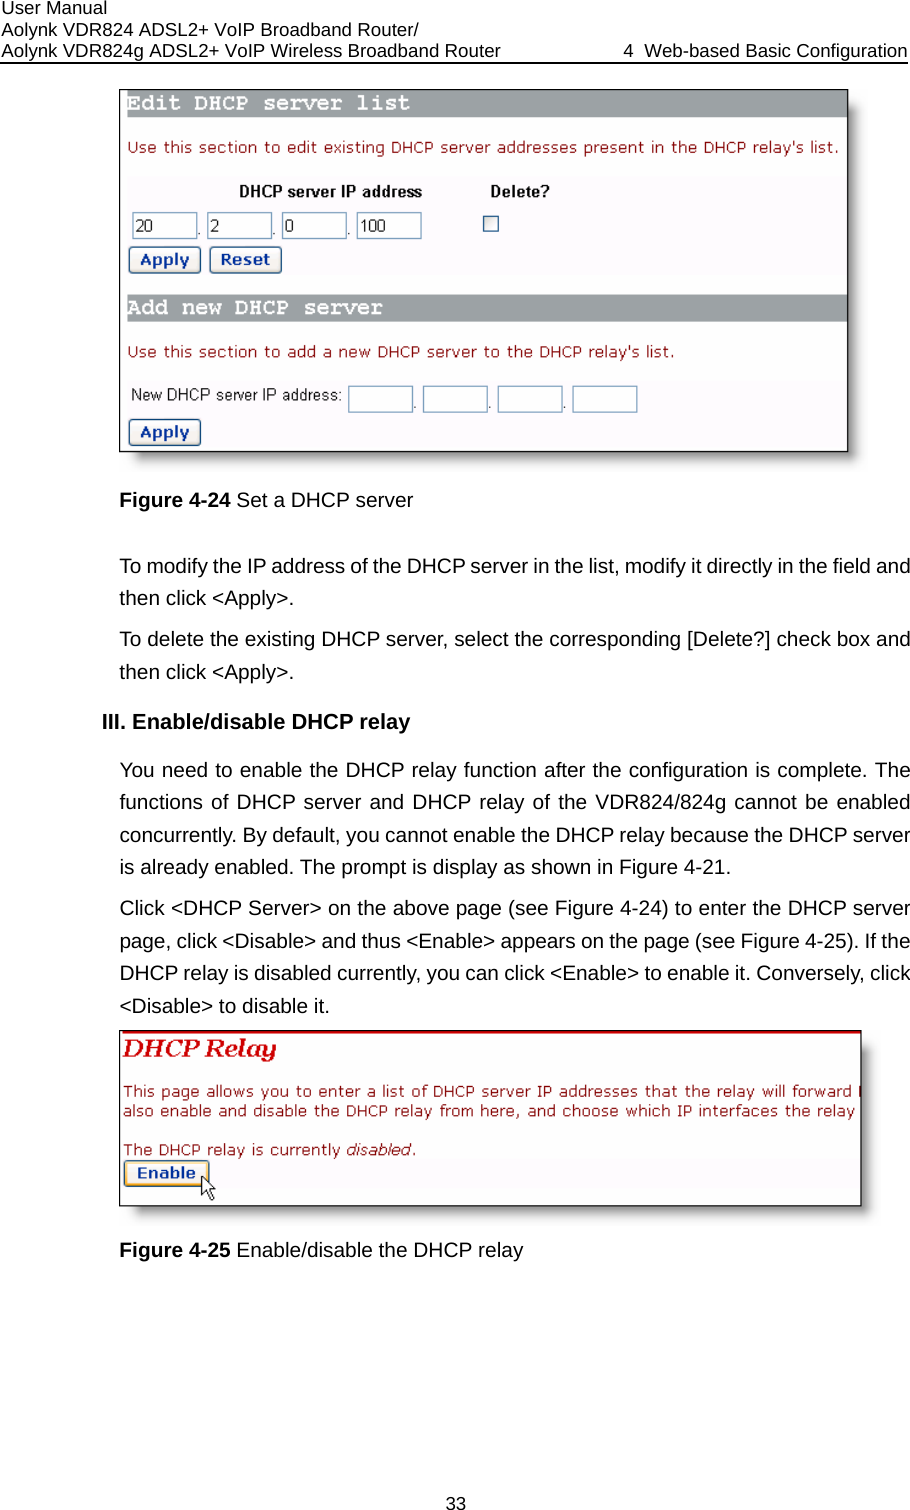 User Manual Aolynk VDR824 ADSL2+ VoIP Broadband Router/ Aolynk VDR824g ADSL2+ VoIP Wireless Broadband Router  4  Web-based Basic Configuration 33  ify the IP address of the DHCP server in the list, modify it directly in the field and then click &lt;Apply&gt;.  DHCP server, select the corresponding [Delete?] check box and IInfiguration is complete. The cannot be enabled se the DHCP server ) to enter the DHCP server  Figure 4-25). If the it. Conversely, click Figure 4-24 Set a DHCP server To modTo delete the existingthen click &lt;Apply&gt;. I. Enable/disable DHCP relay You need to enable the DHCP relay function after the cofunctions of DHCP server and DHCP relay of the VDR824/824g concurrently. By default, you cannot enable the DHCP relay becauis already enabled. The prompt is display as shown in Figure 4-21. Click &lt;DHCP Server&gt; on the above page (see Figure 4-24page, click &lt;Disable&gt; and thus &lt;Enable&gt; appears on the page (seeDHCP relay is disabled currently, you can click &lt;Enable&gt; to enable &lt;Disable&gt; to disable it.  Figure 4-25 Enable/disable the DHCP relay  